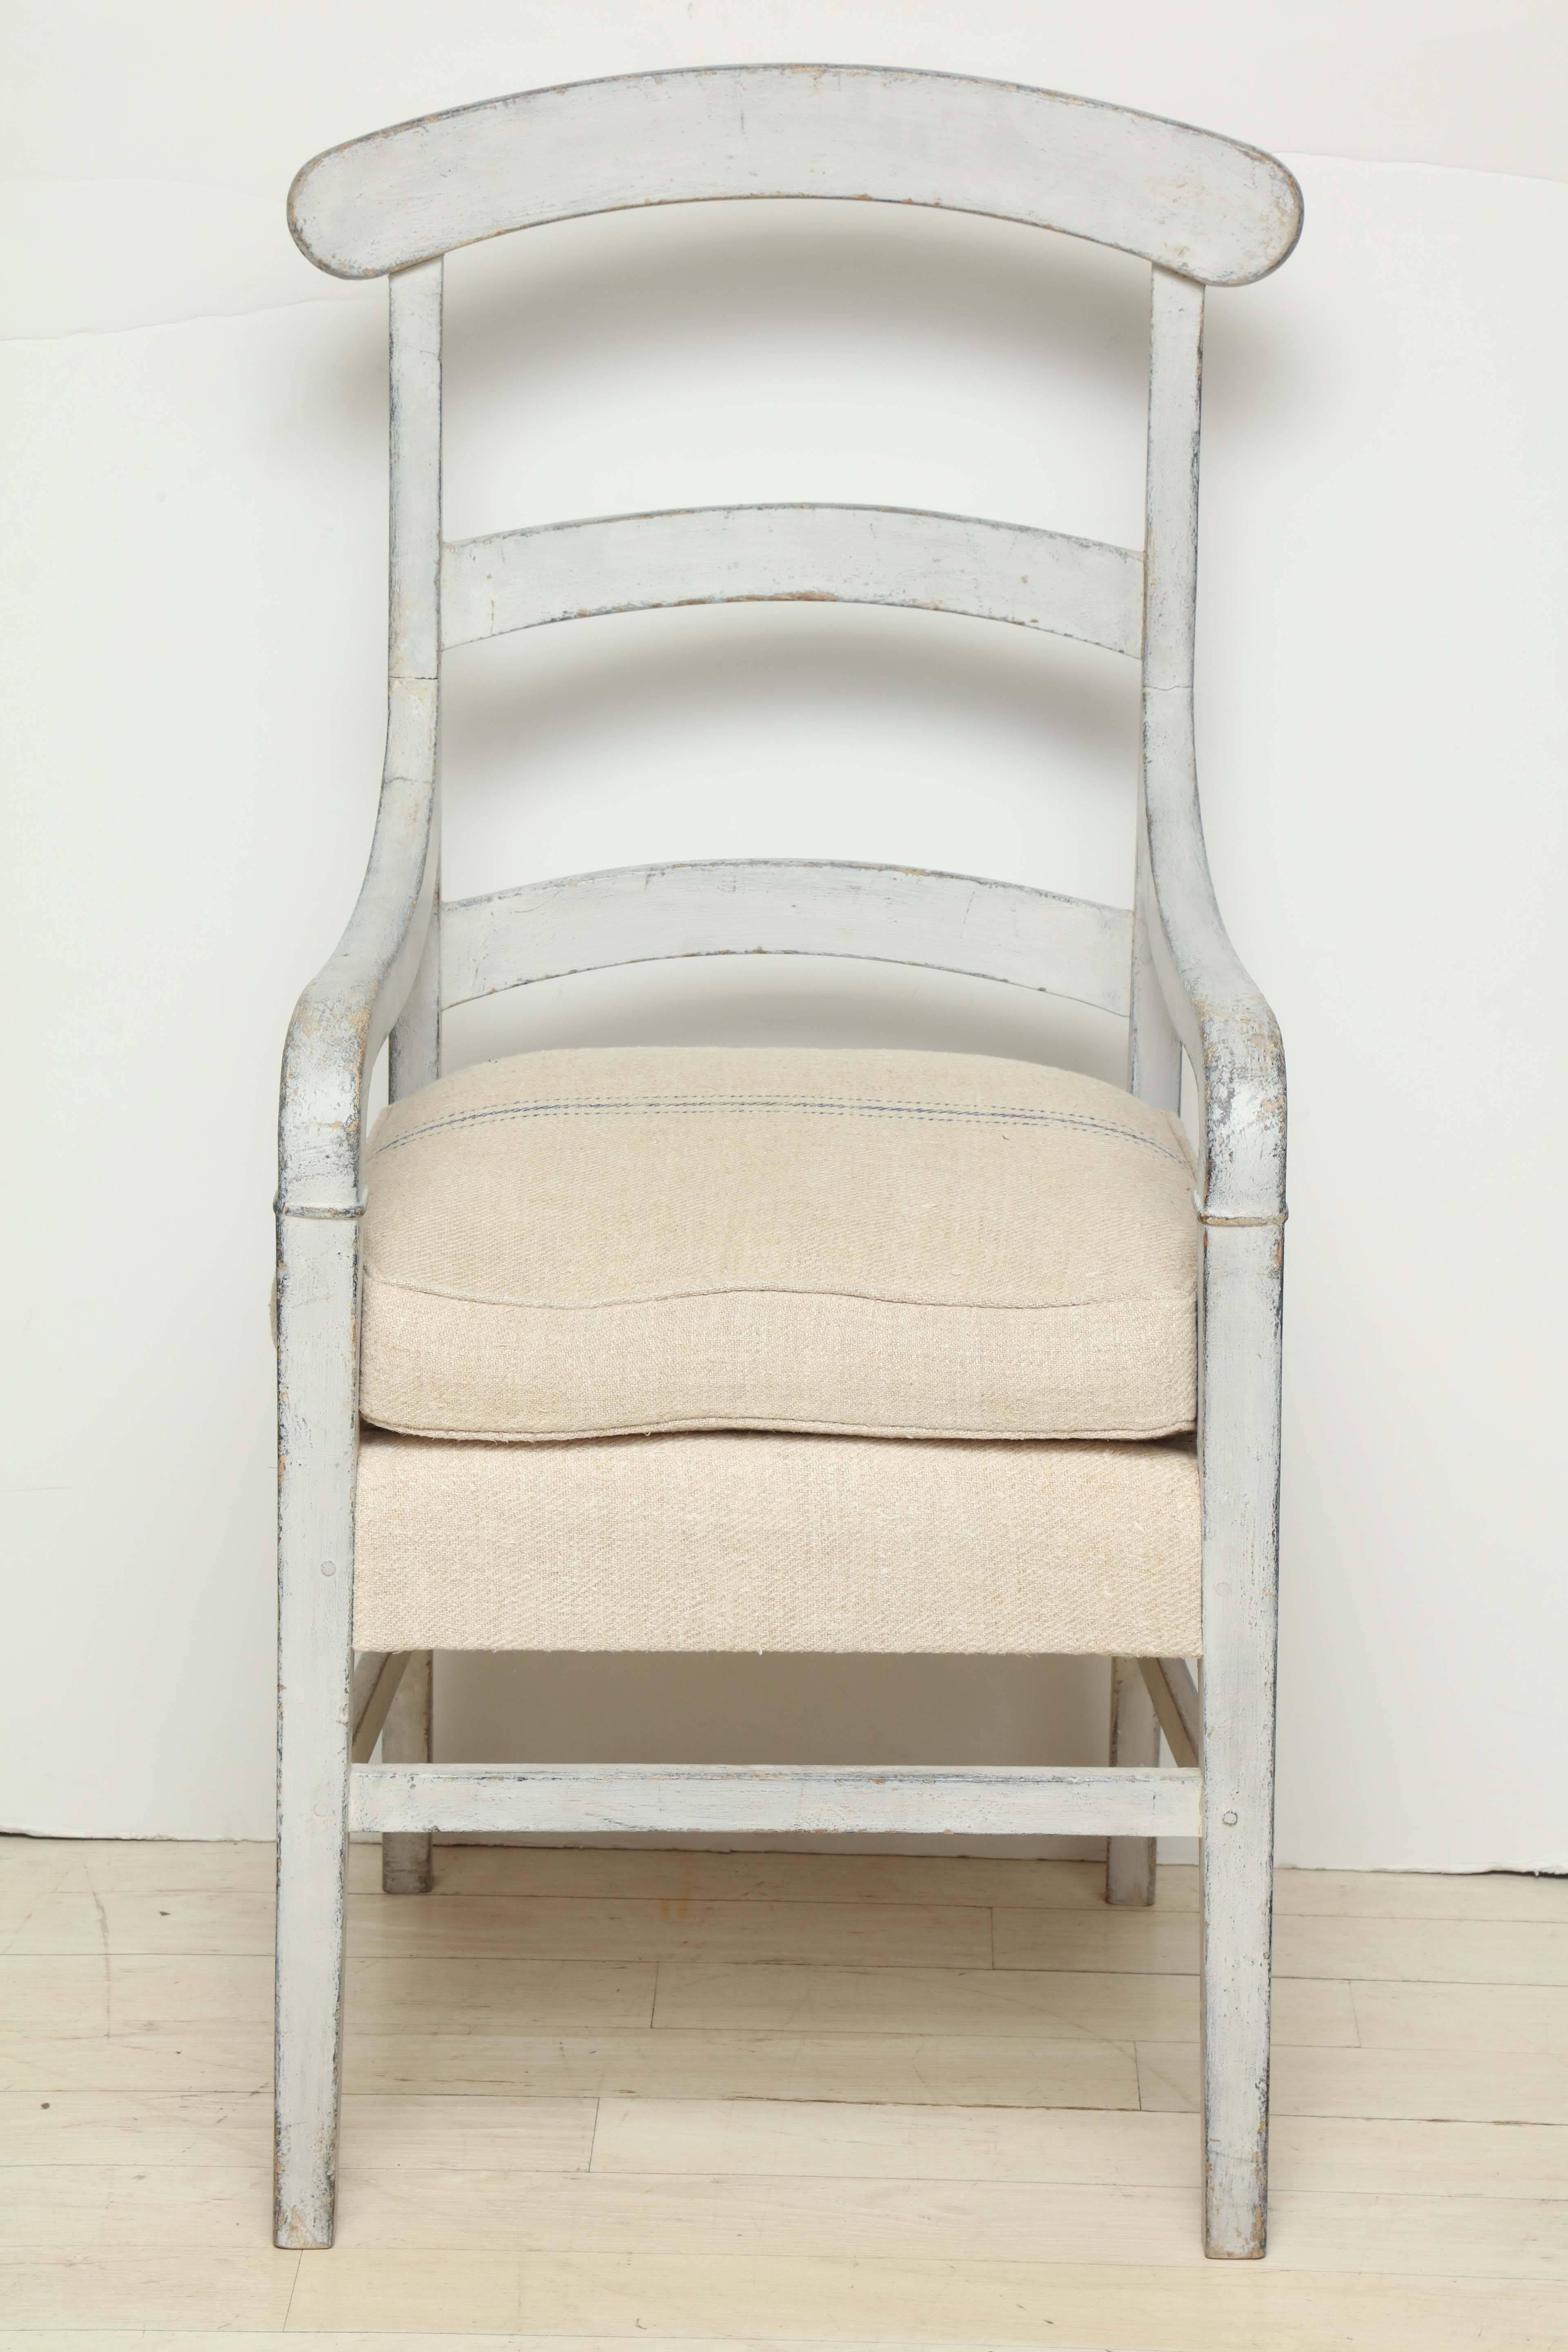 19th Century French Ladder Back Painted Wood Arm Chair with Linen Cushion In Excellent Condition For Sale In New York, NY